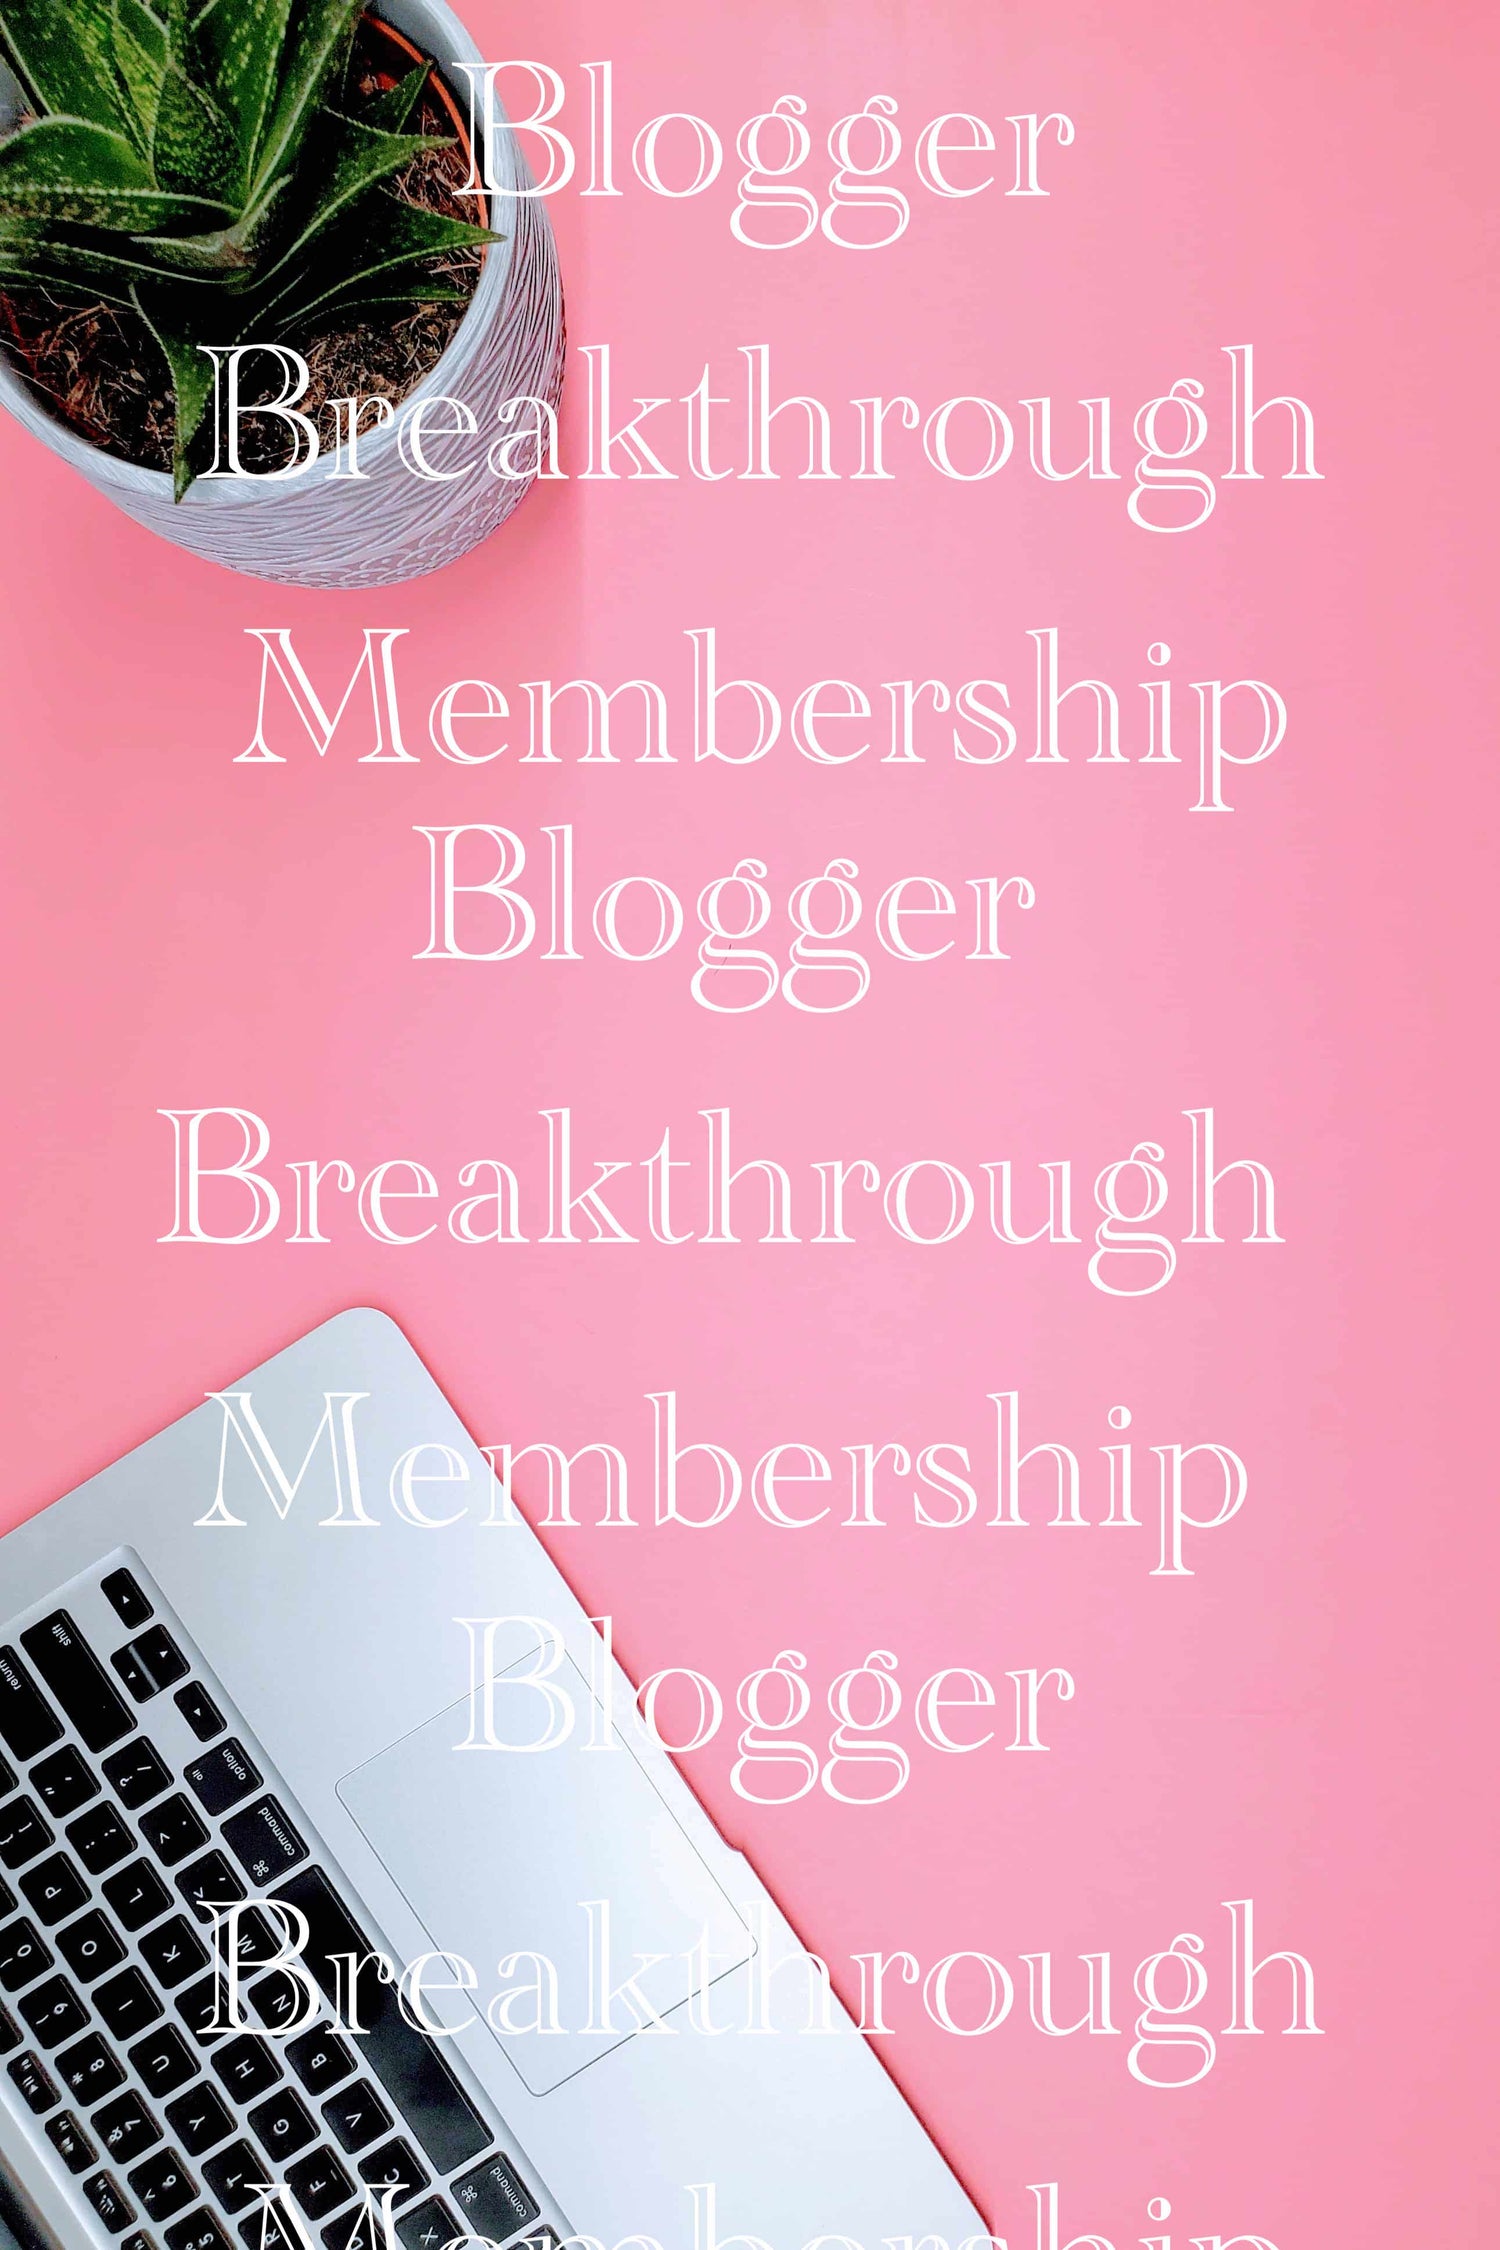 A Financial Theme Stock Photos (set of 5) on a pink background with the words &quot;blogger&quot; repeated multiple times, adding to the blog&